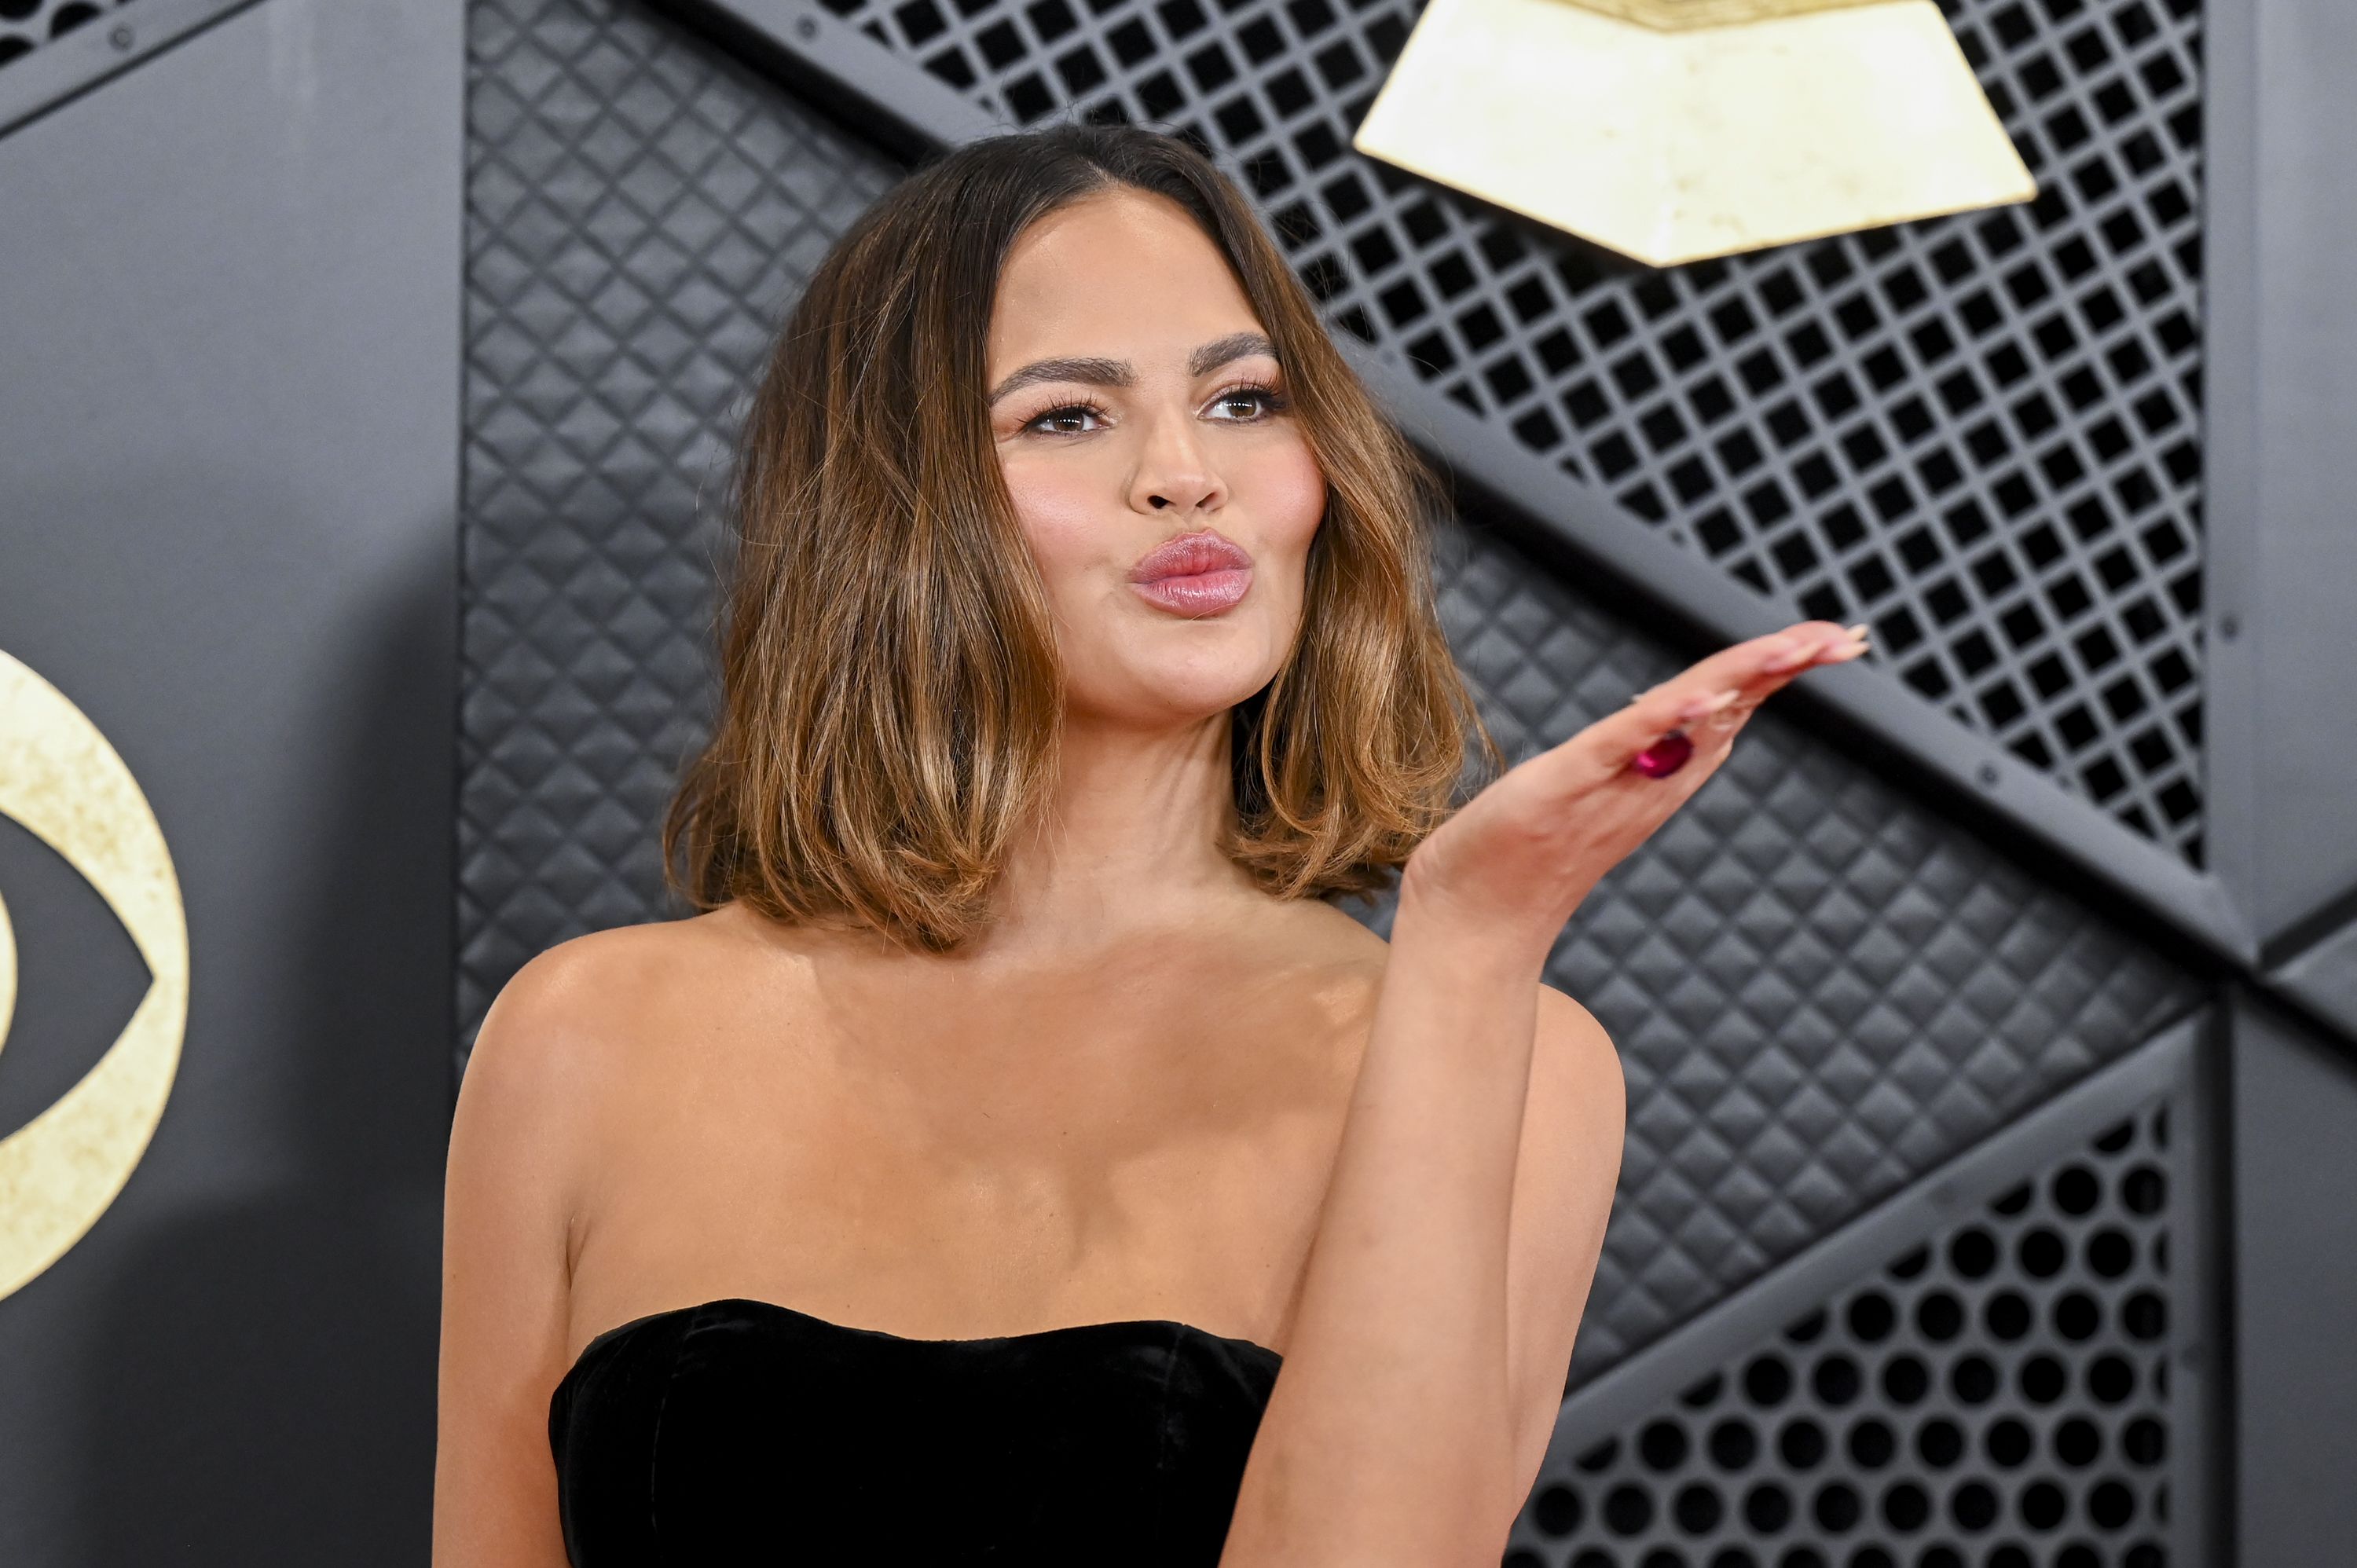 Chrissy Teigen just shared a topless photo showing motherhood in all its  glory